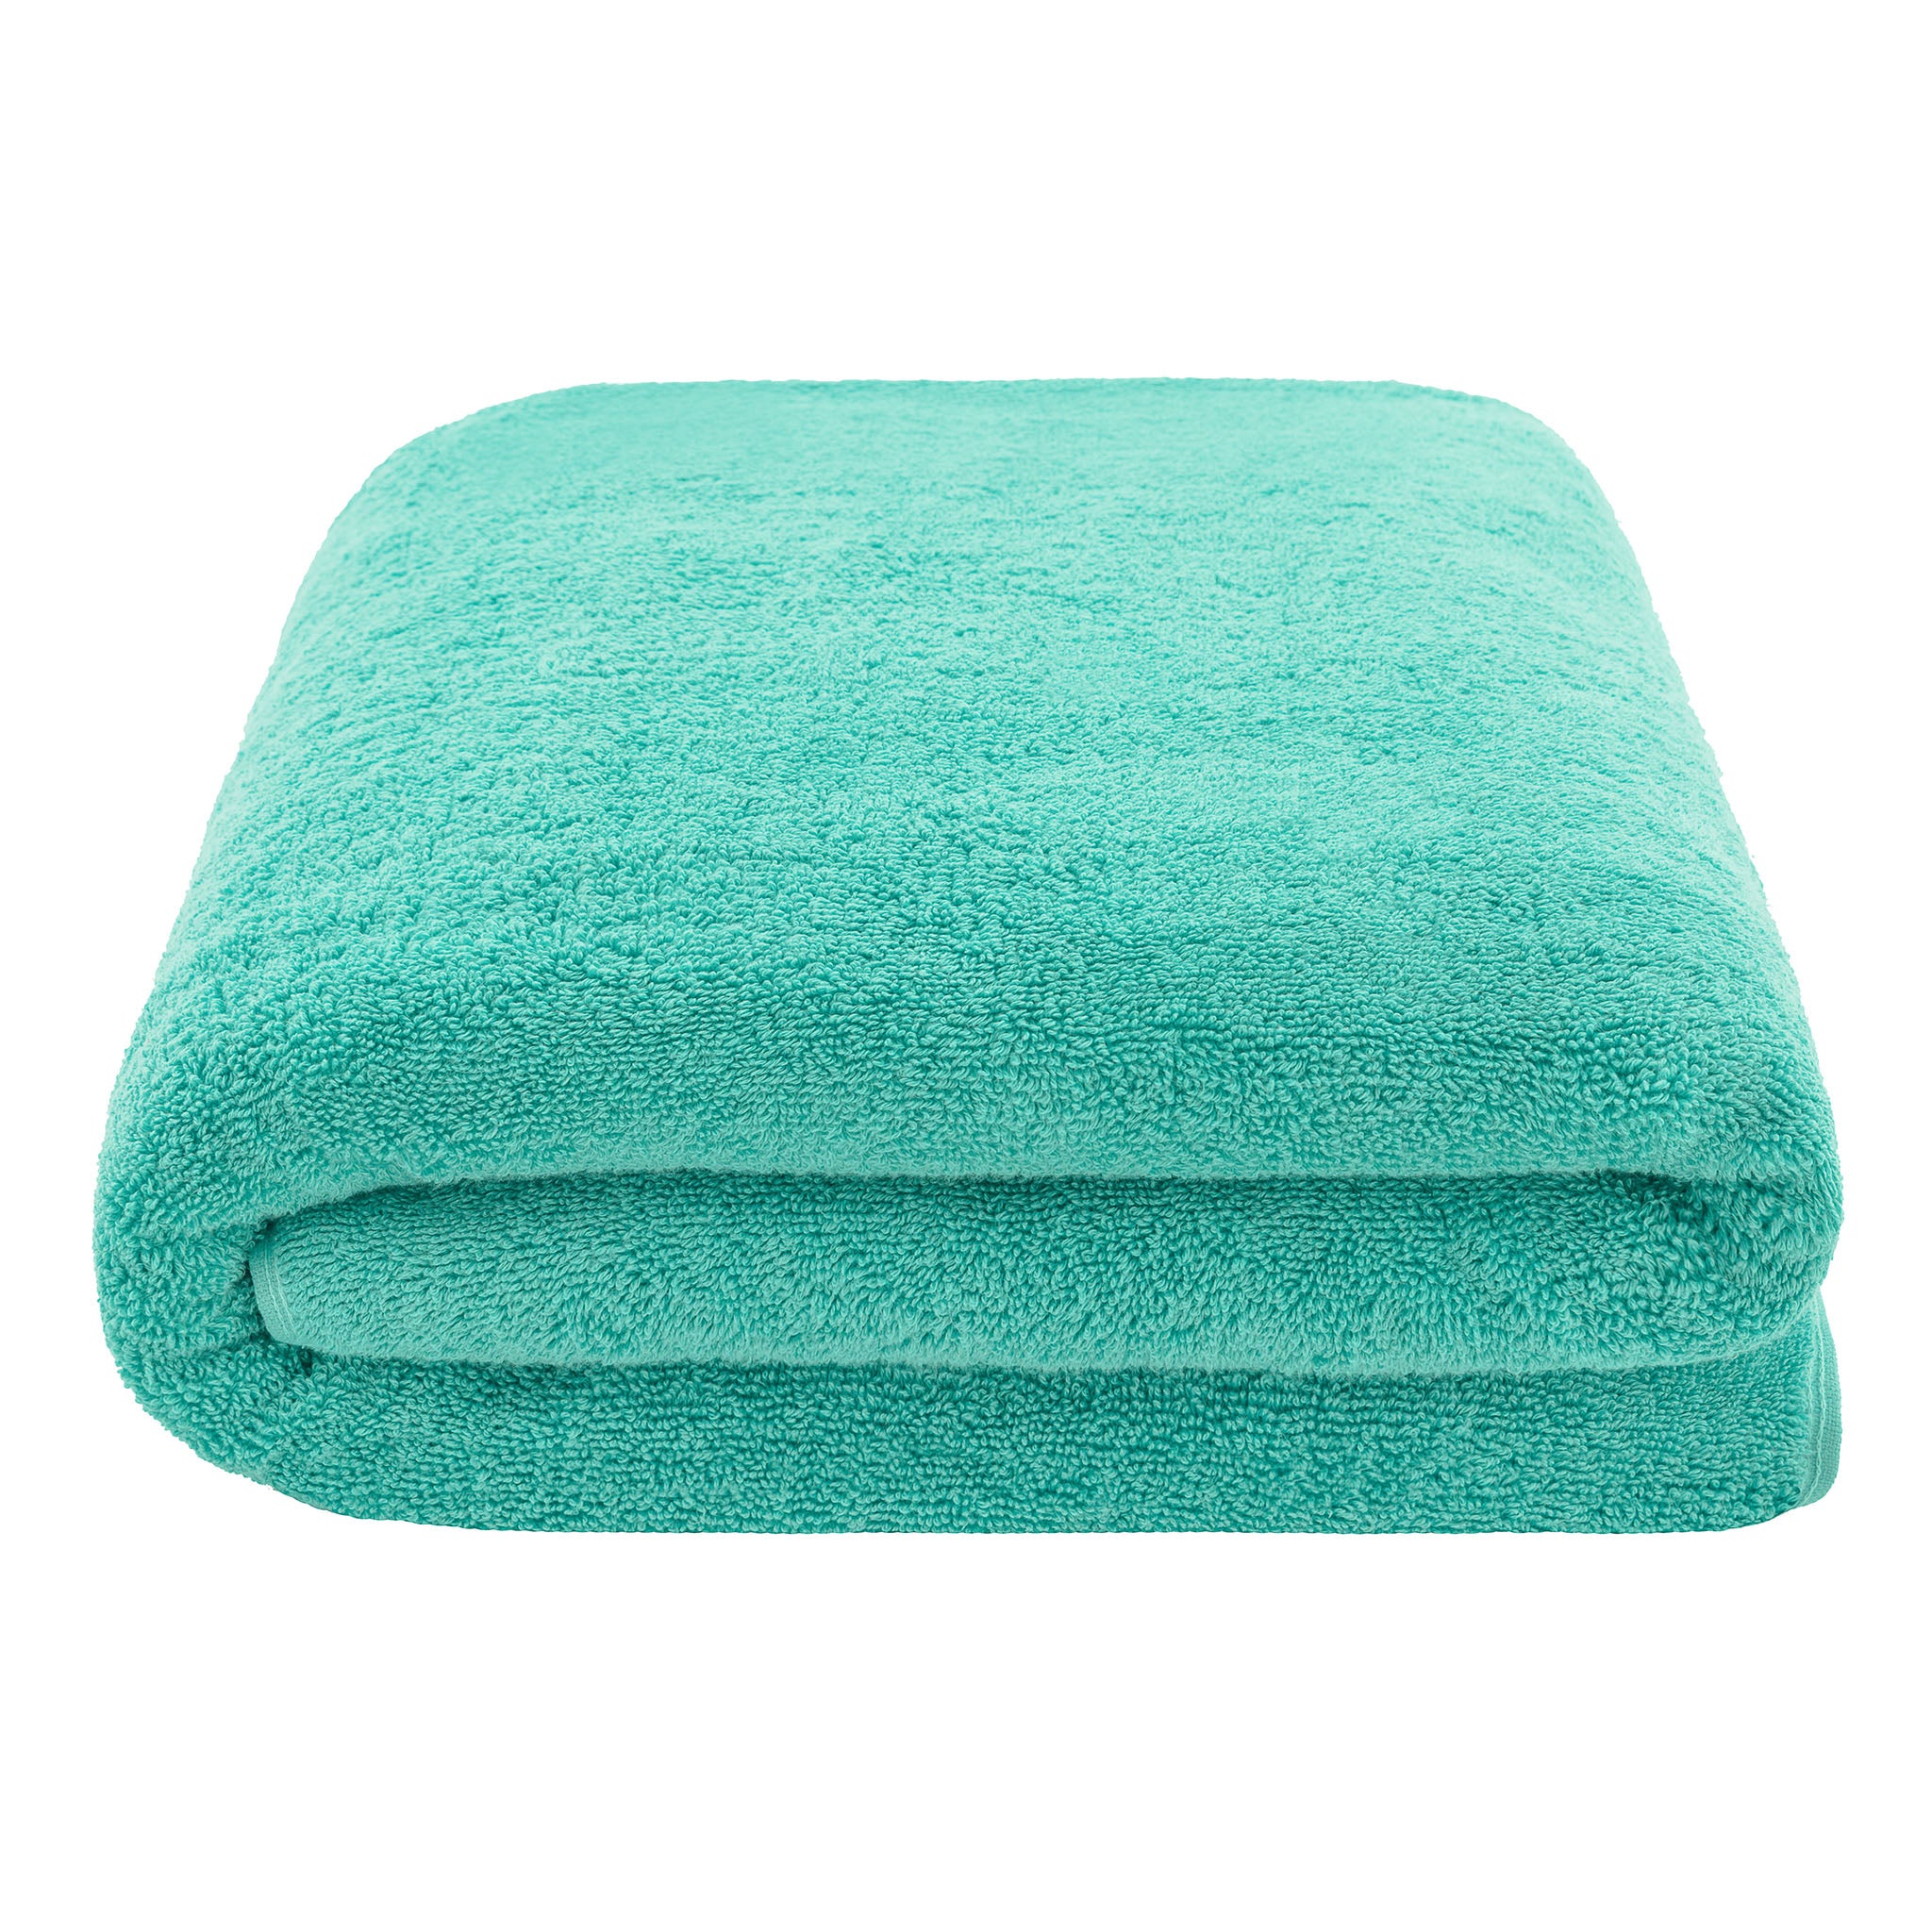 American Soft Linen 100% Ring Spun Cotton 40x80 Inches Oversized Bath Sheets turquoise-blue-3